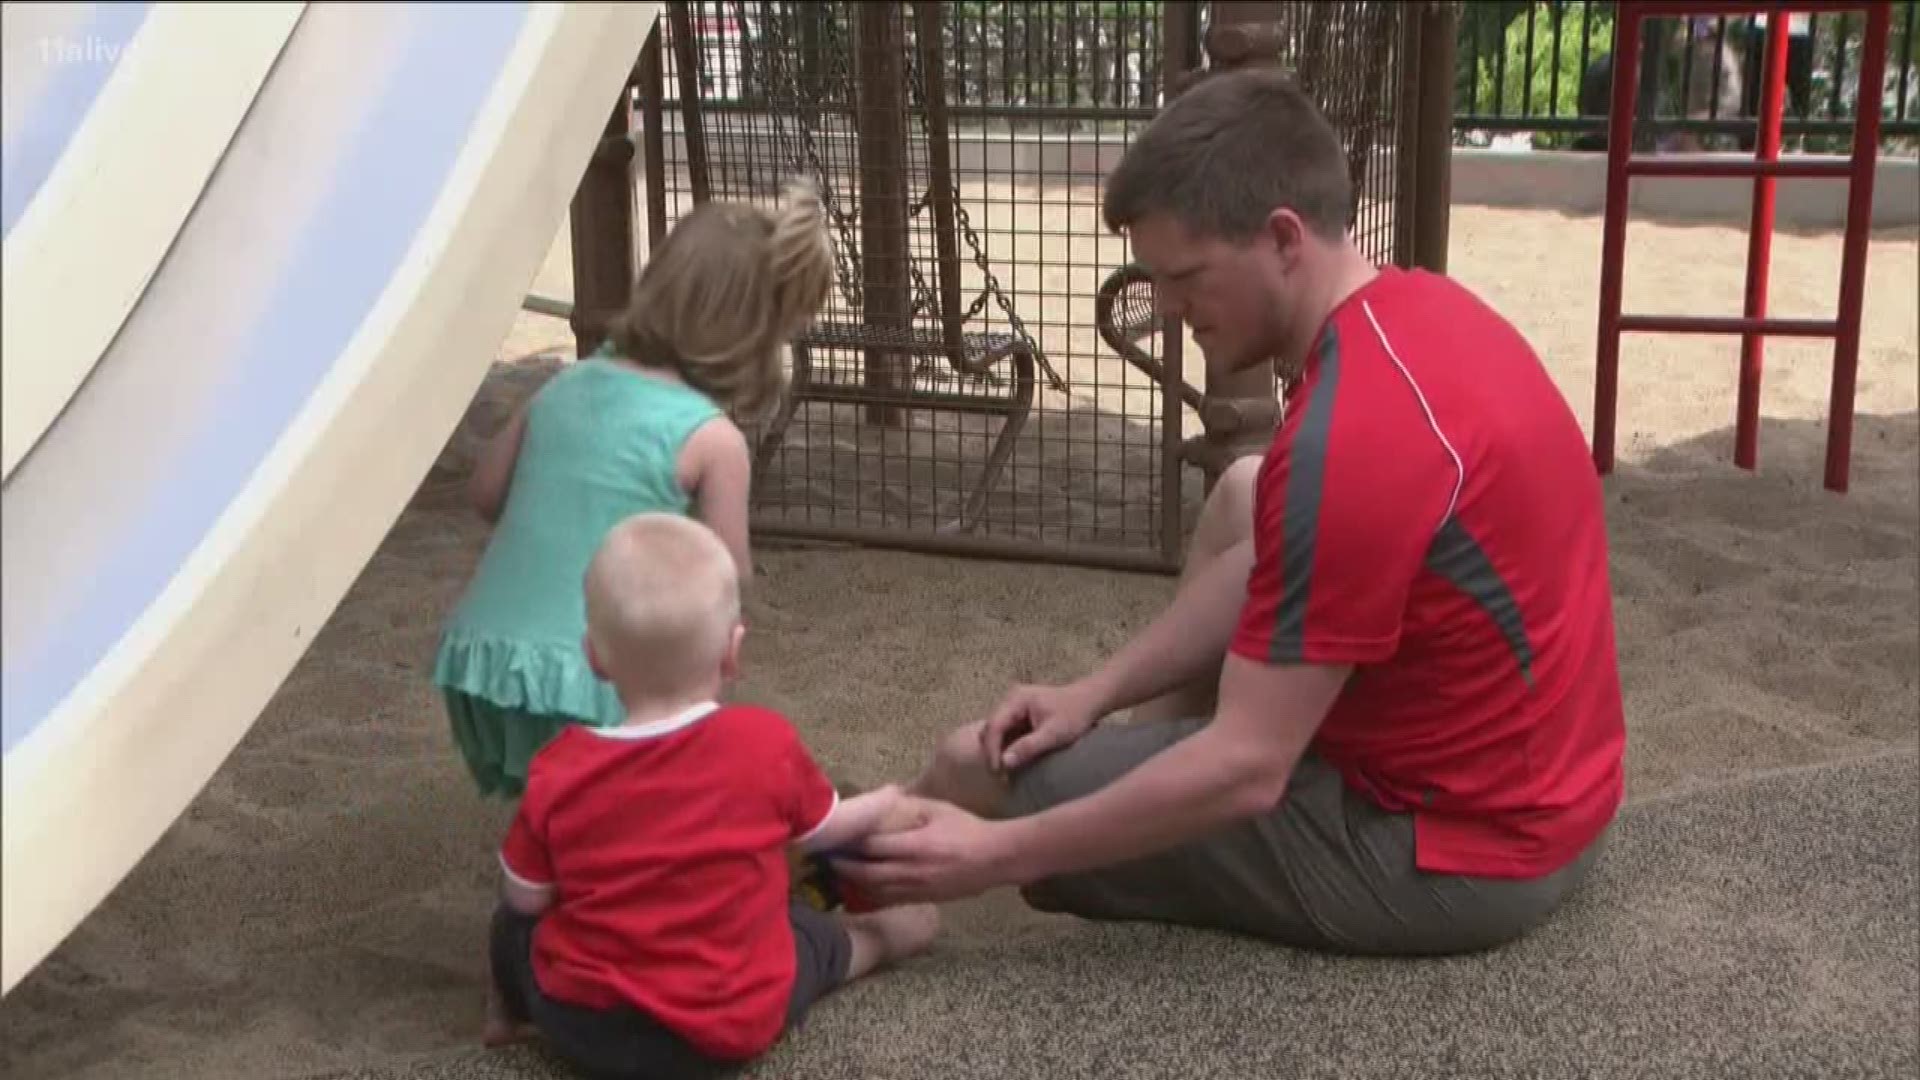 The study says dads are more playful with their kids.